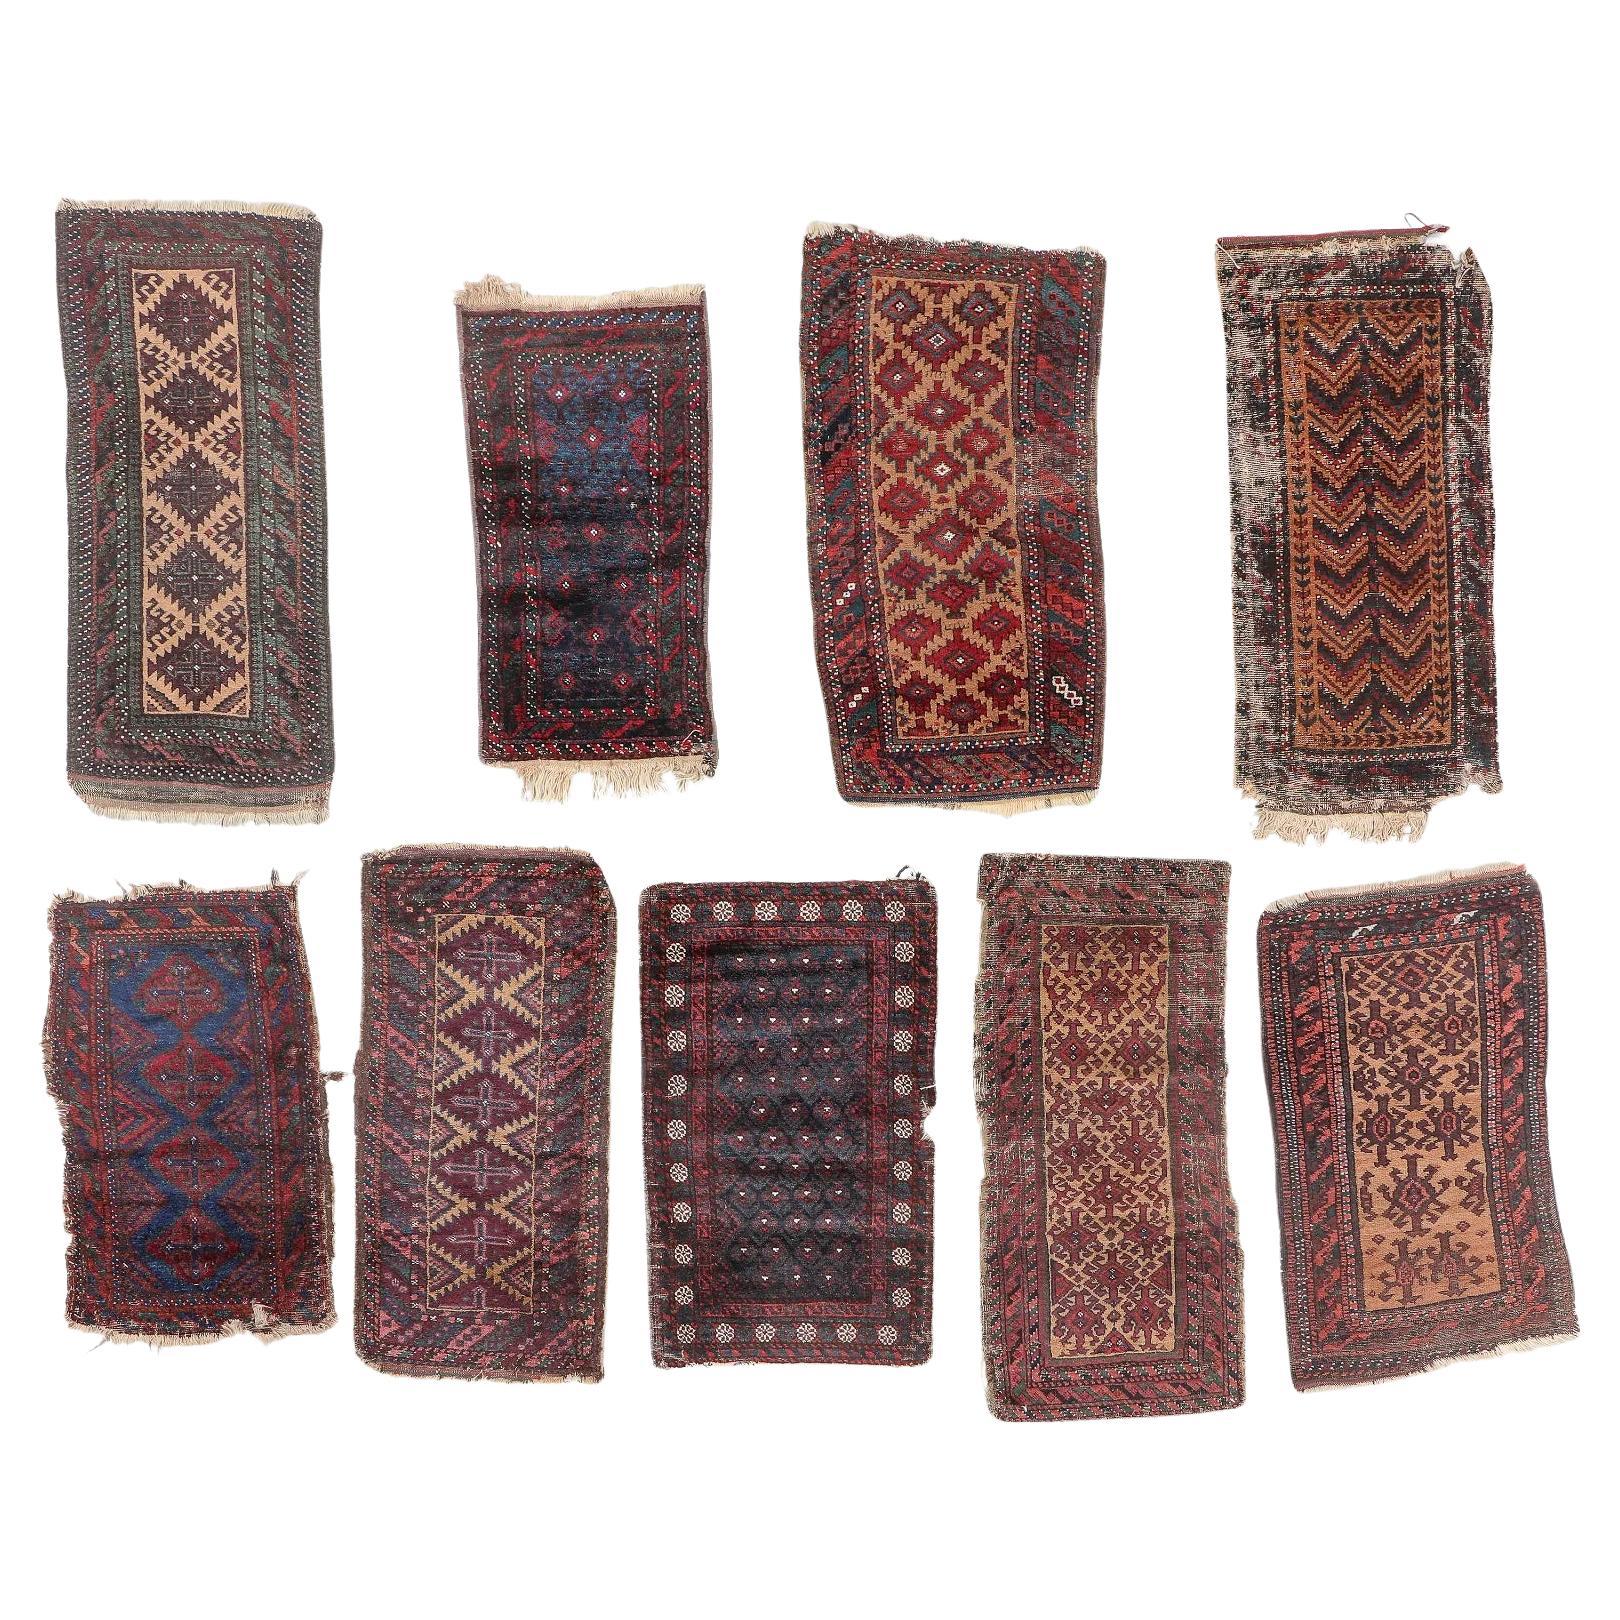 Lot of 9 Antique Afghan Baluch Collectible Rugs 1.6' x 3.2', 1870s - 2B29 For Sale